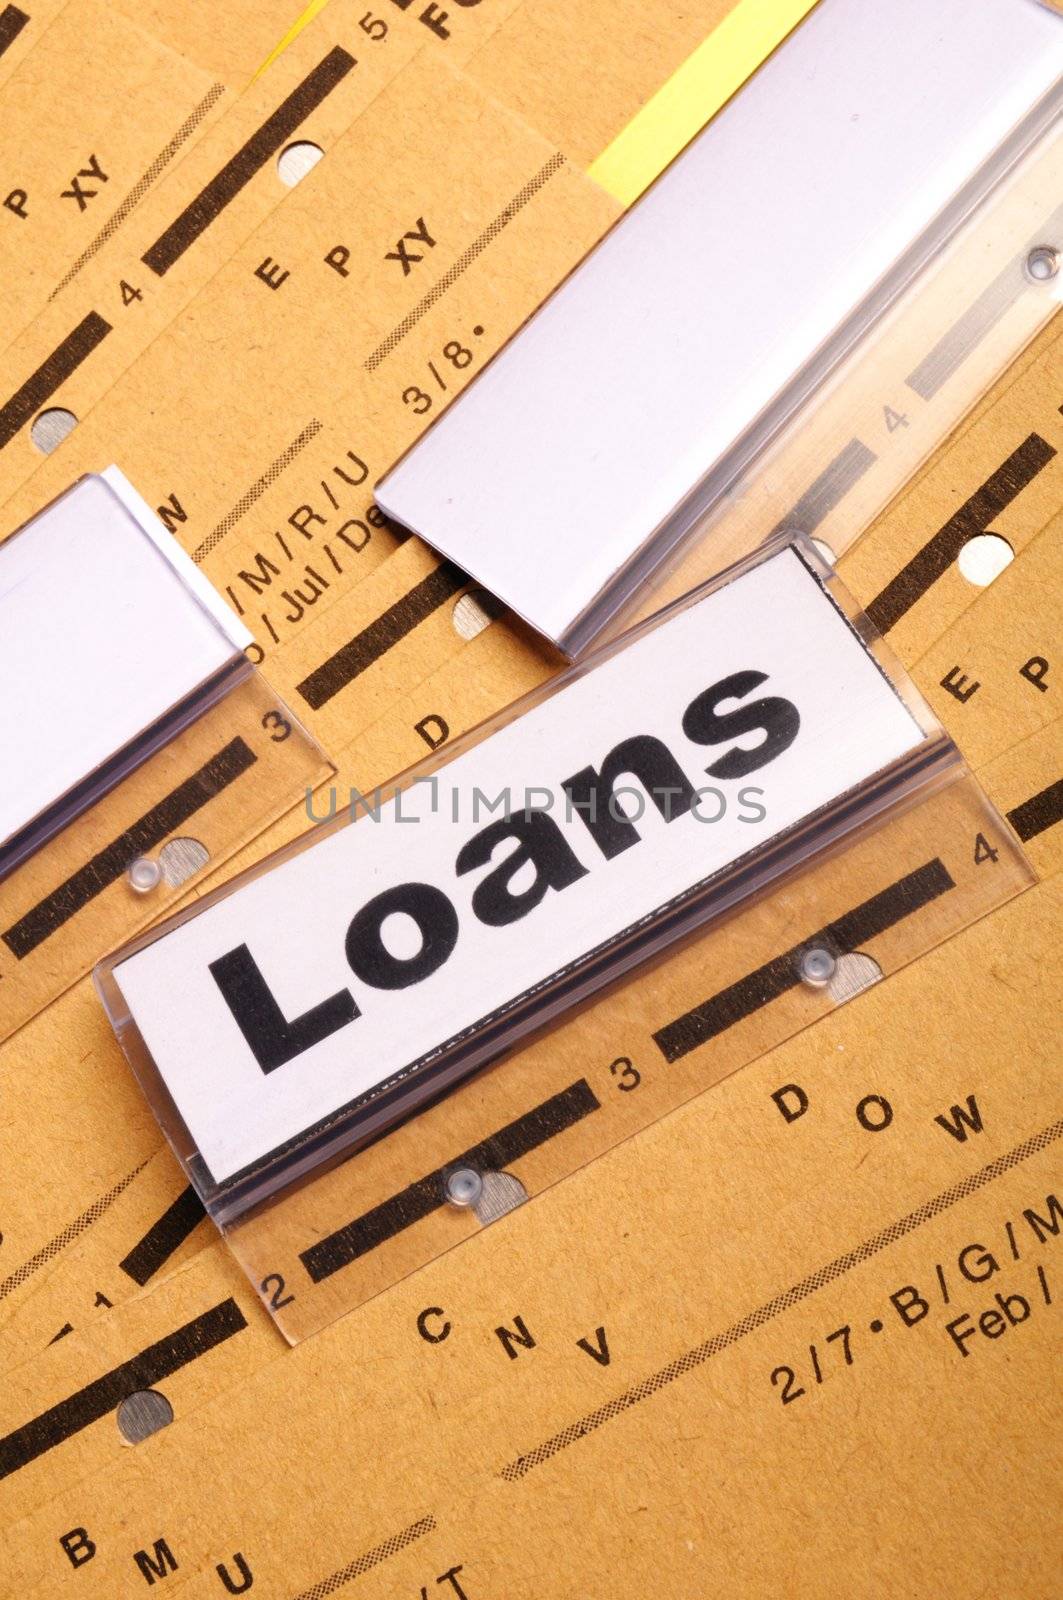 loan application in business folder showing financial investment concept